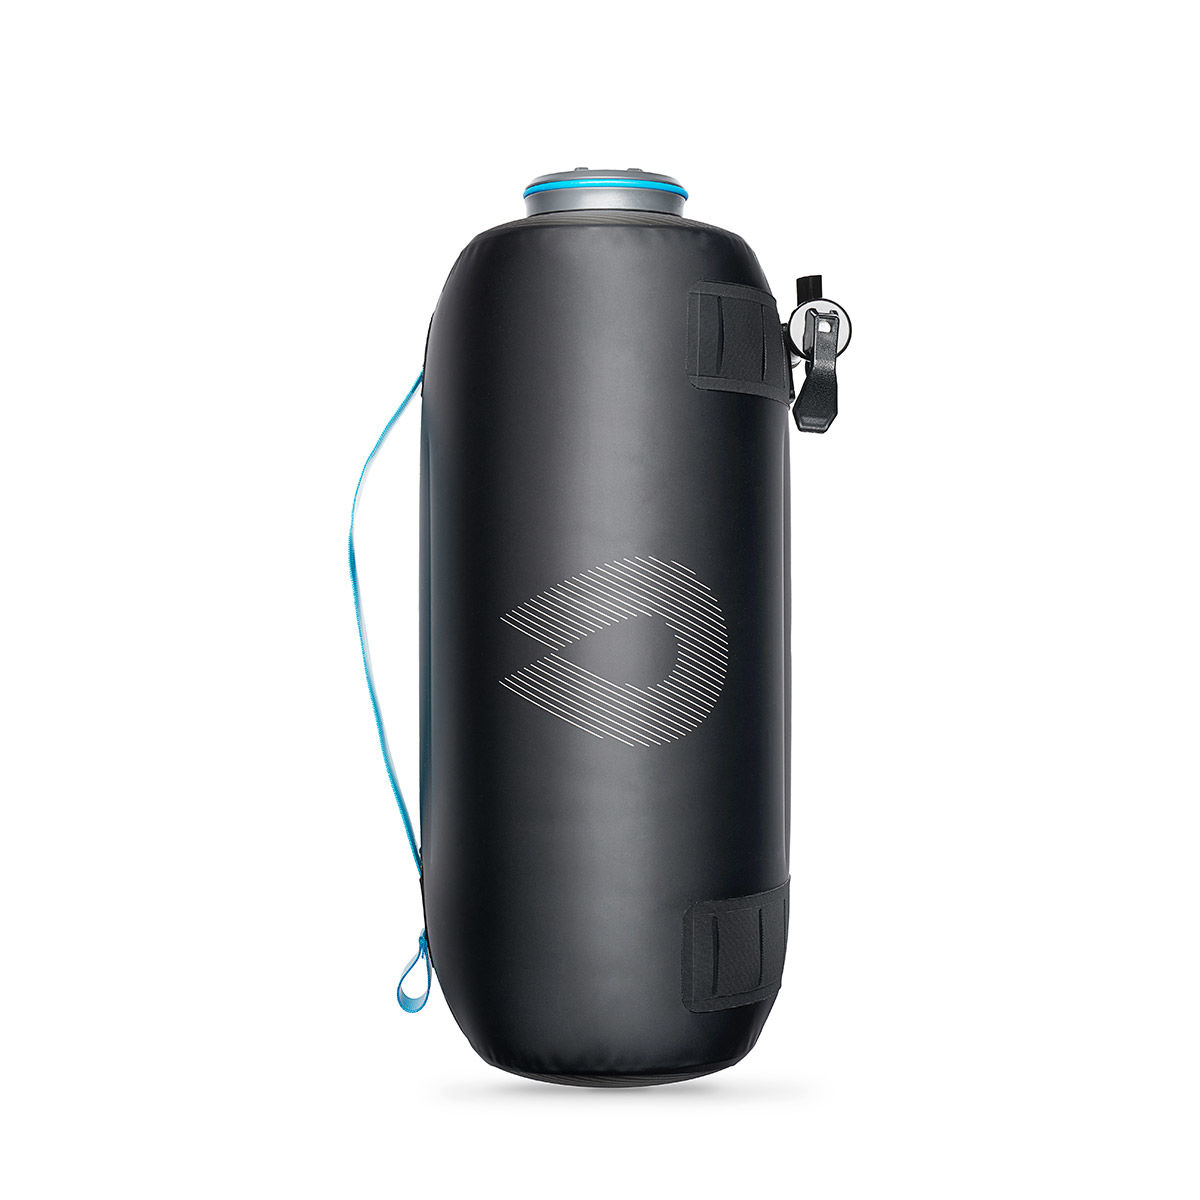 Hydrapak Expedition water storage bag - 8L